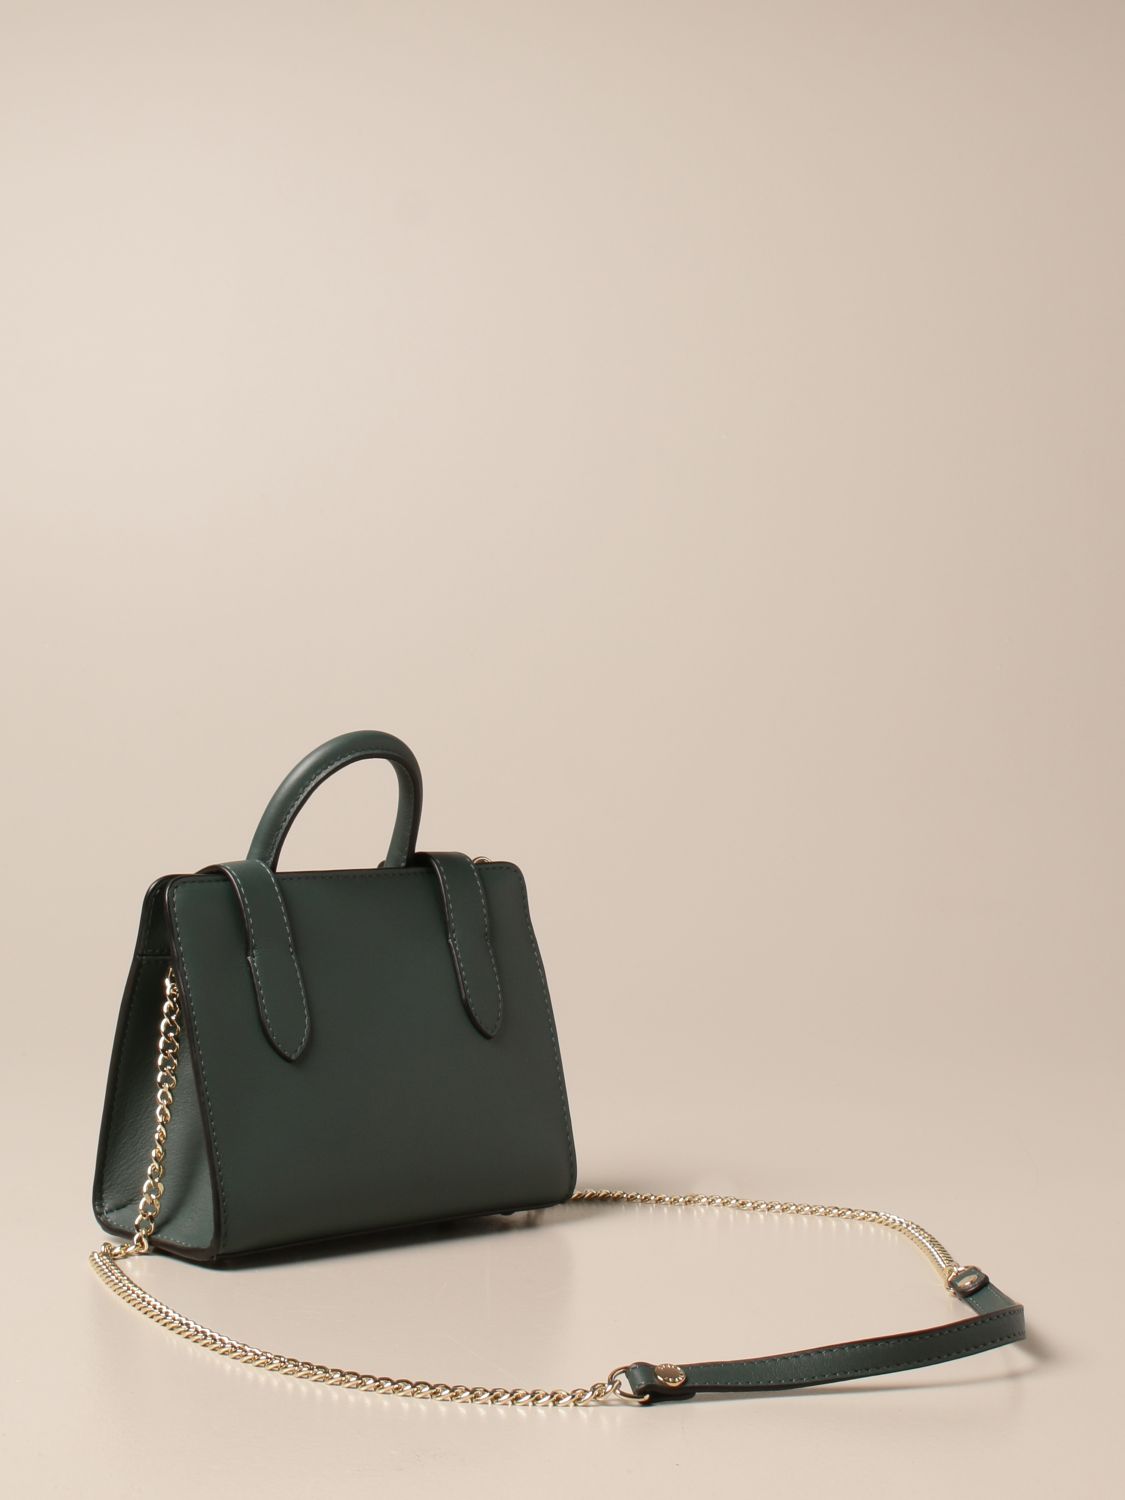 STRATHBERRY: Nano Tote leather bag - Bottle Green